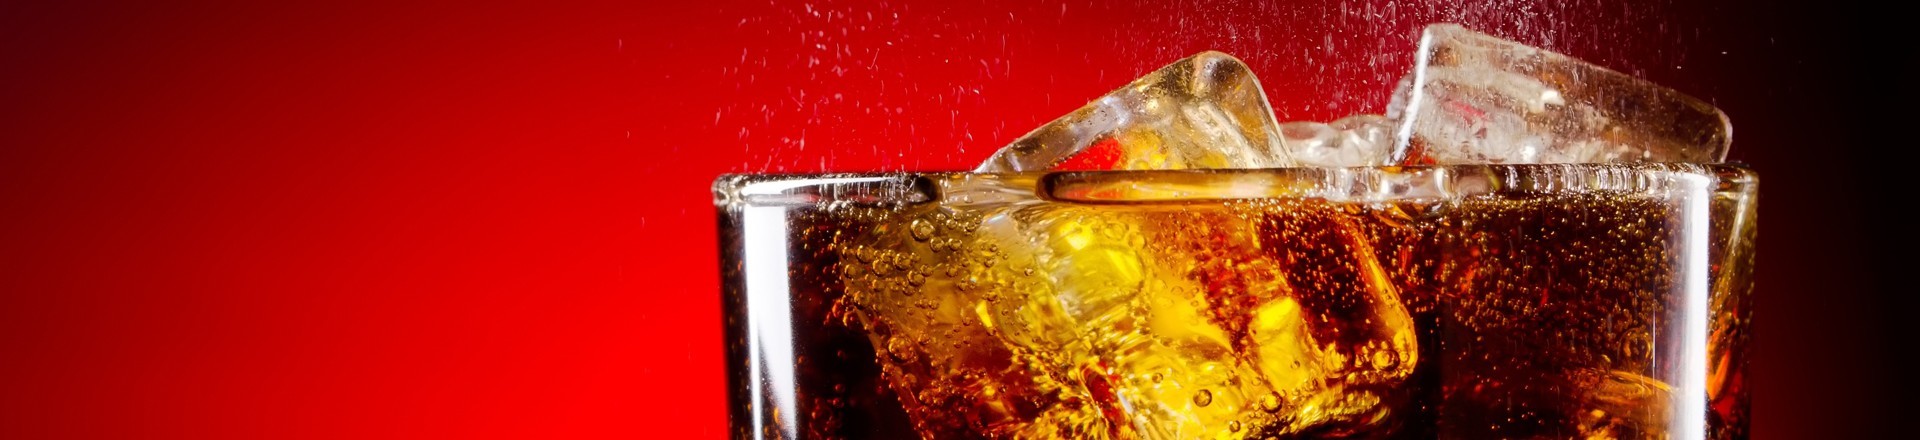 diet soda may promote weight gain